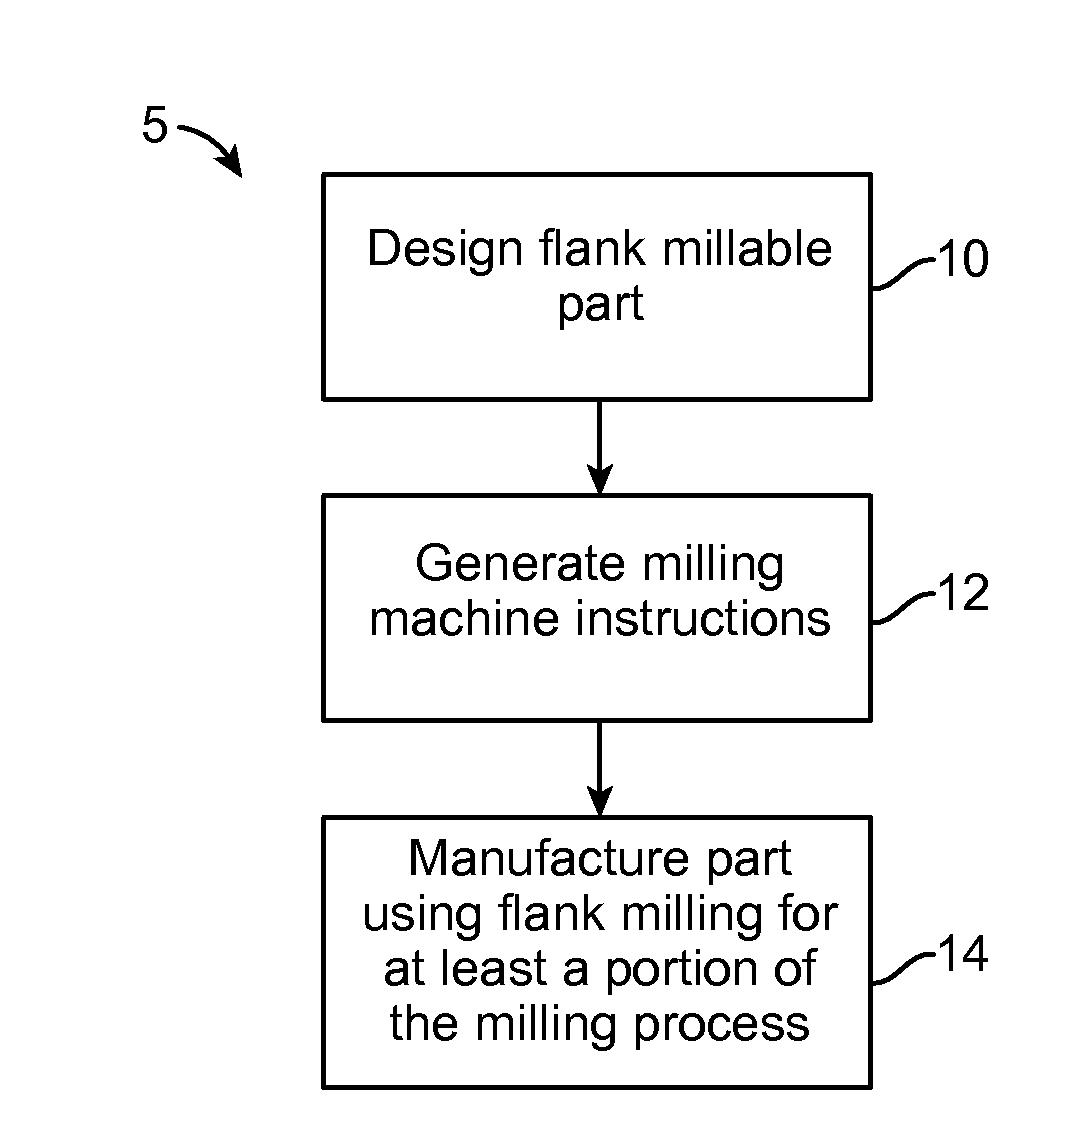 Methods, Systems, And Devices For Designing and Manufacturing Flank Millable Components